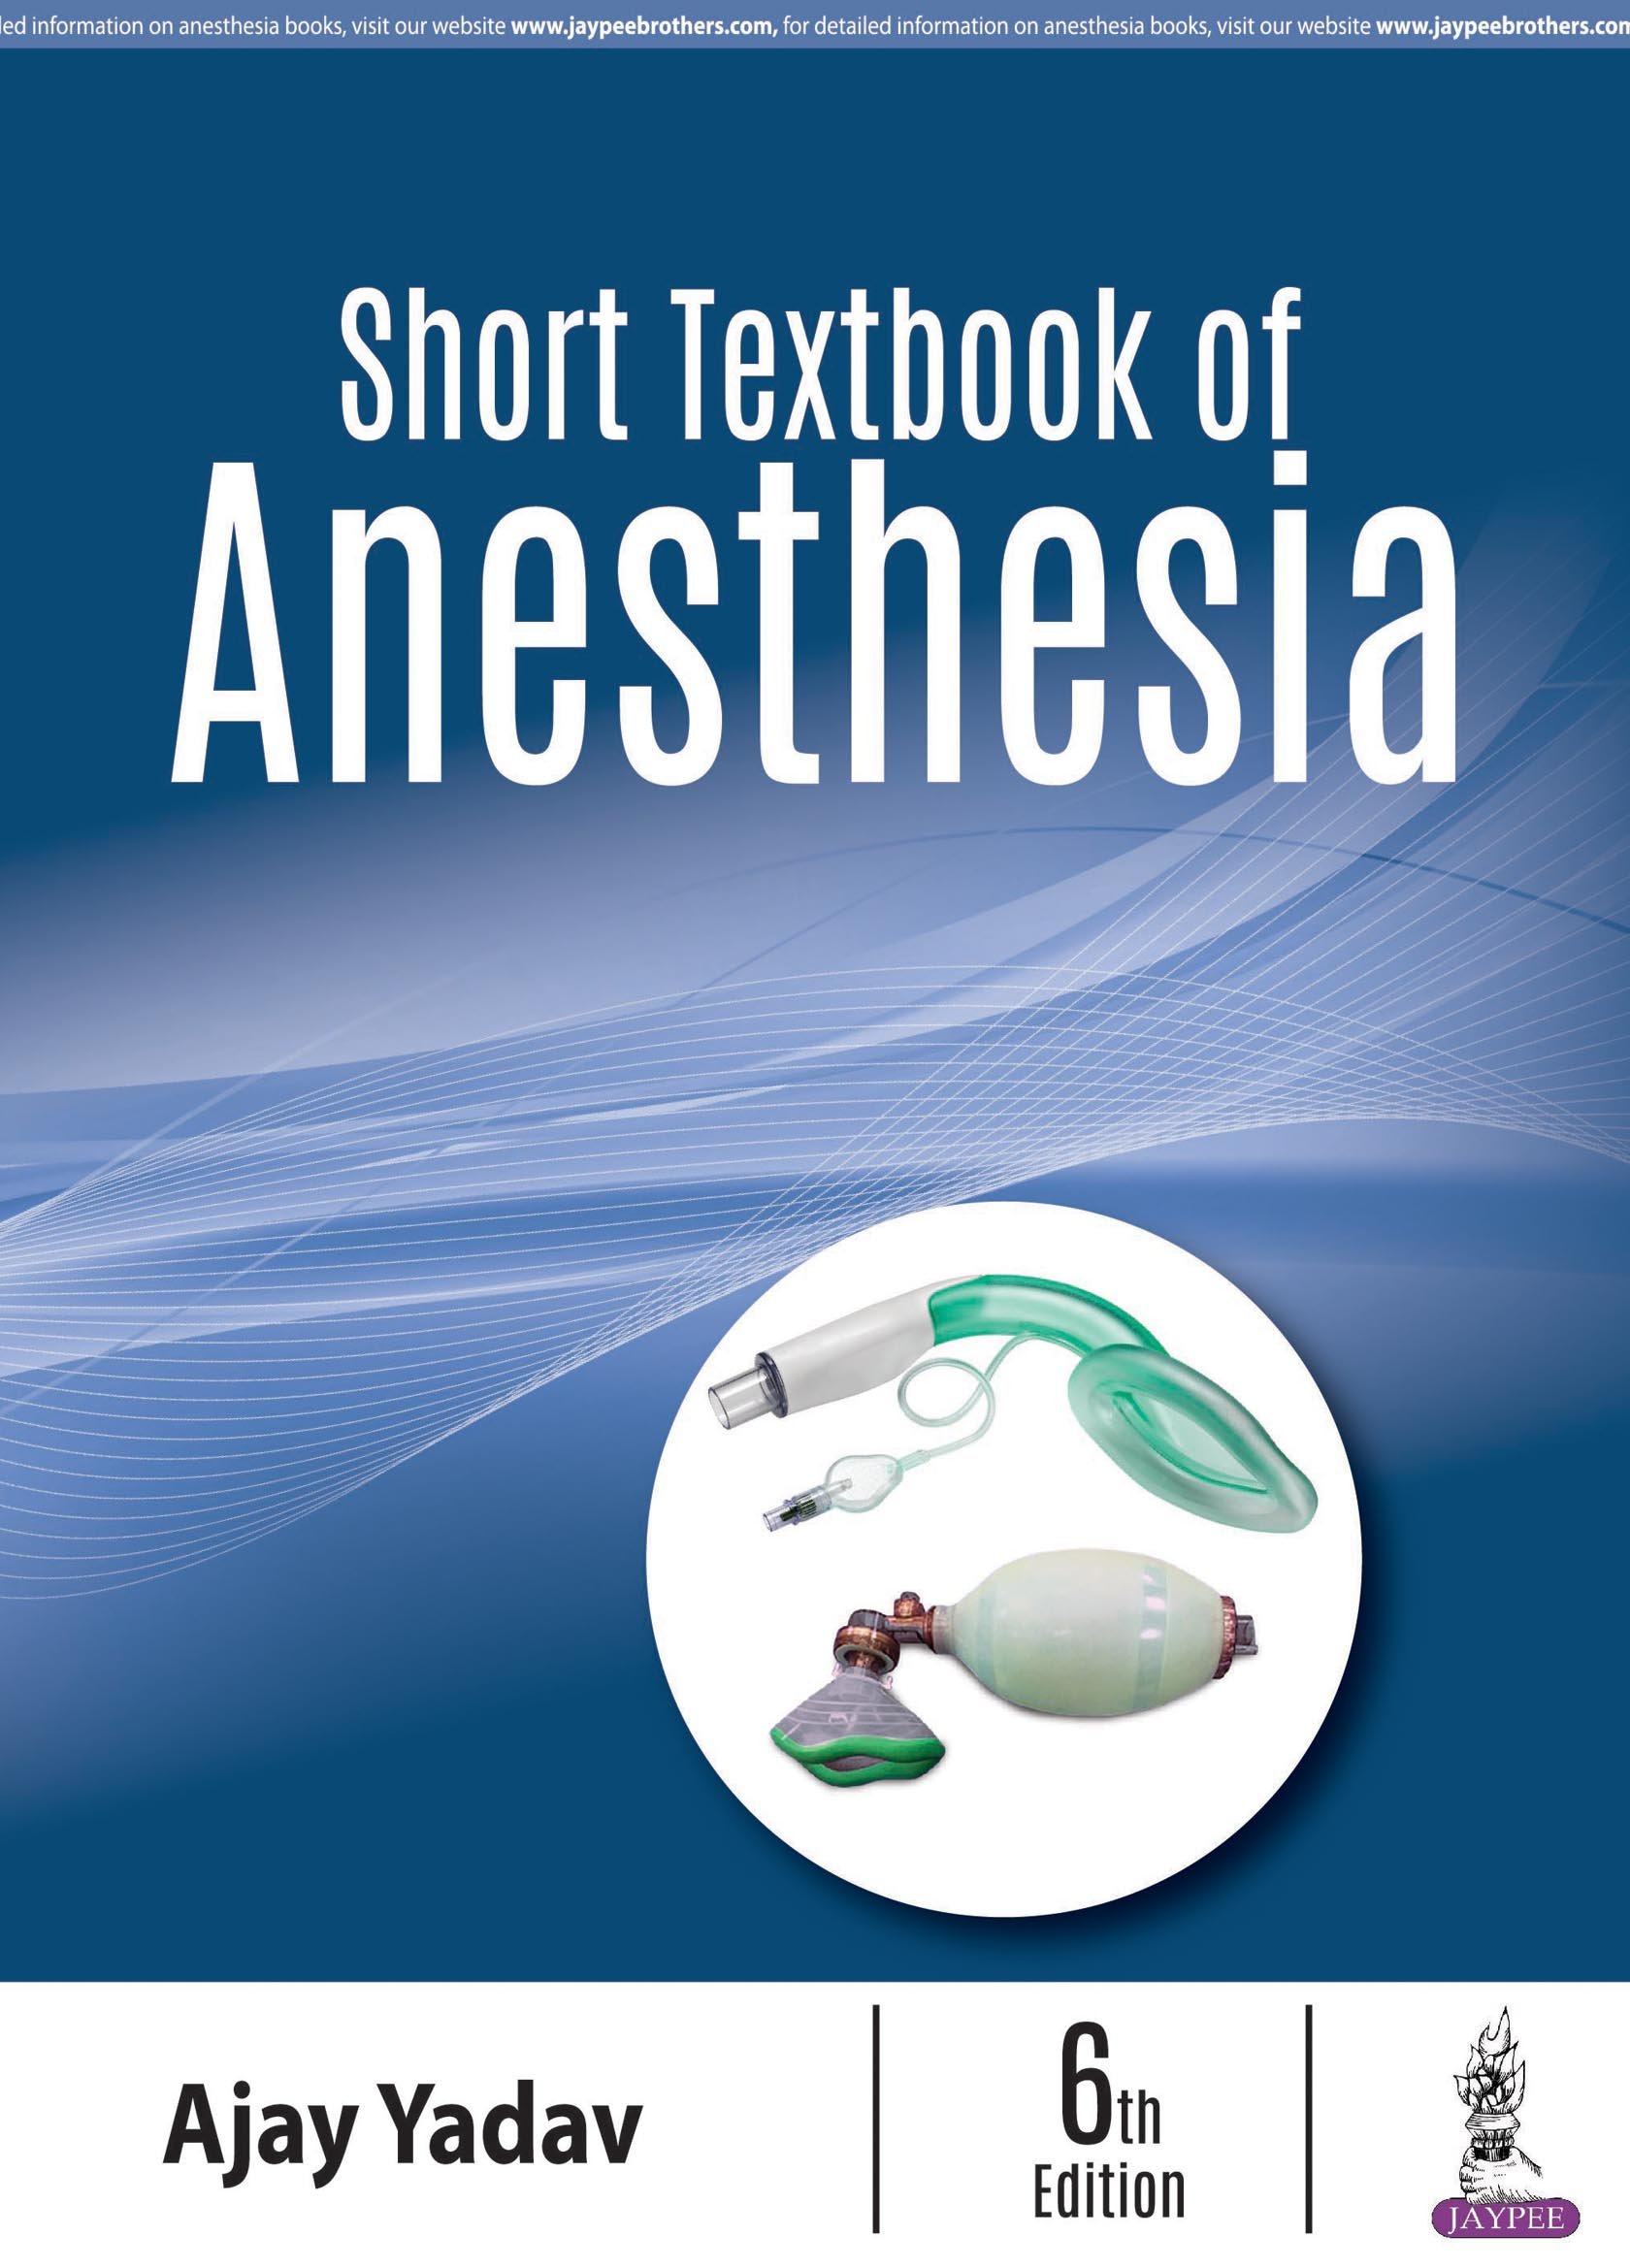 Short Textbook of Anesthesia 6th Edition 2018